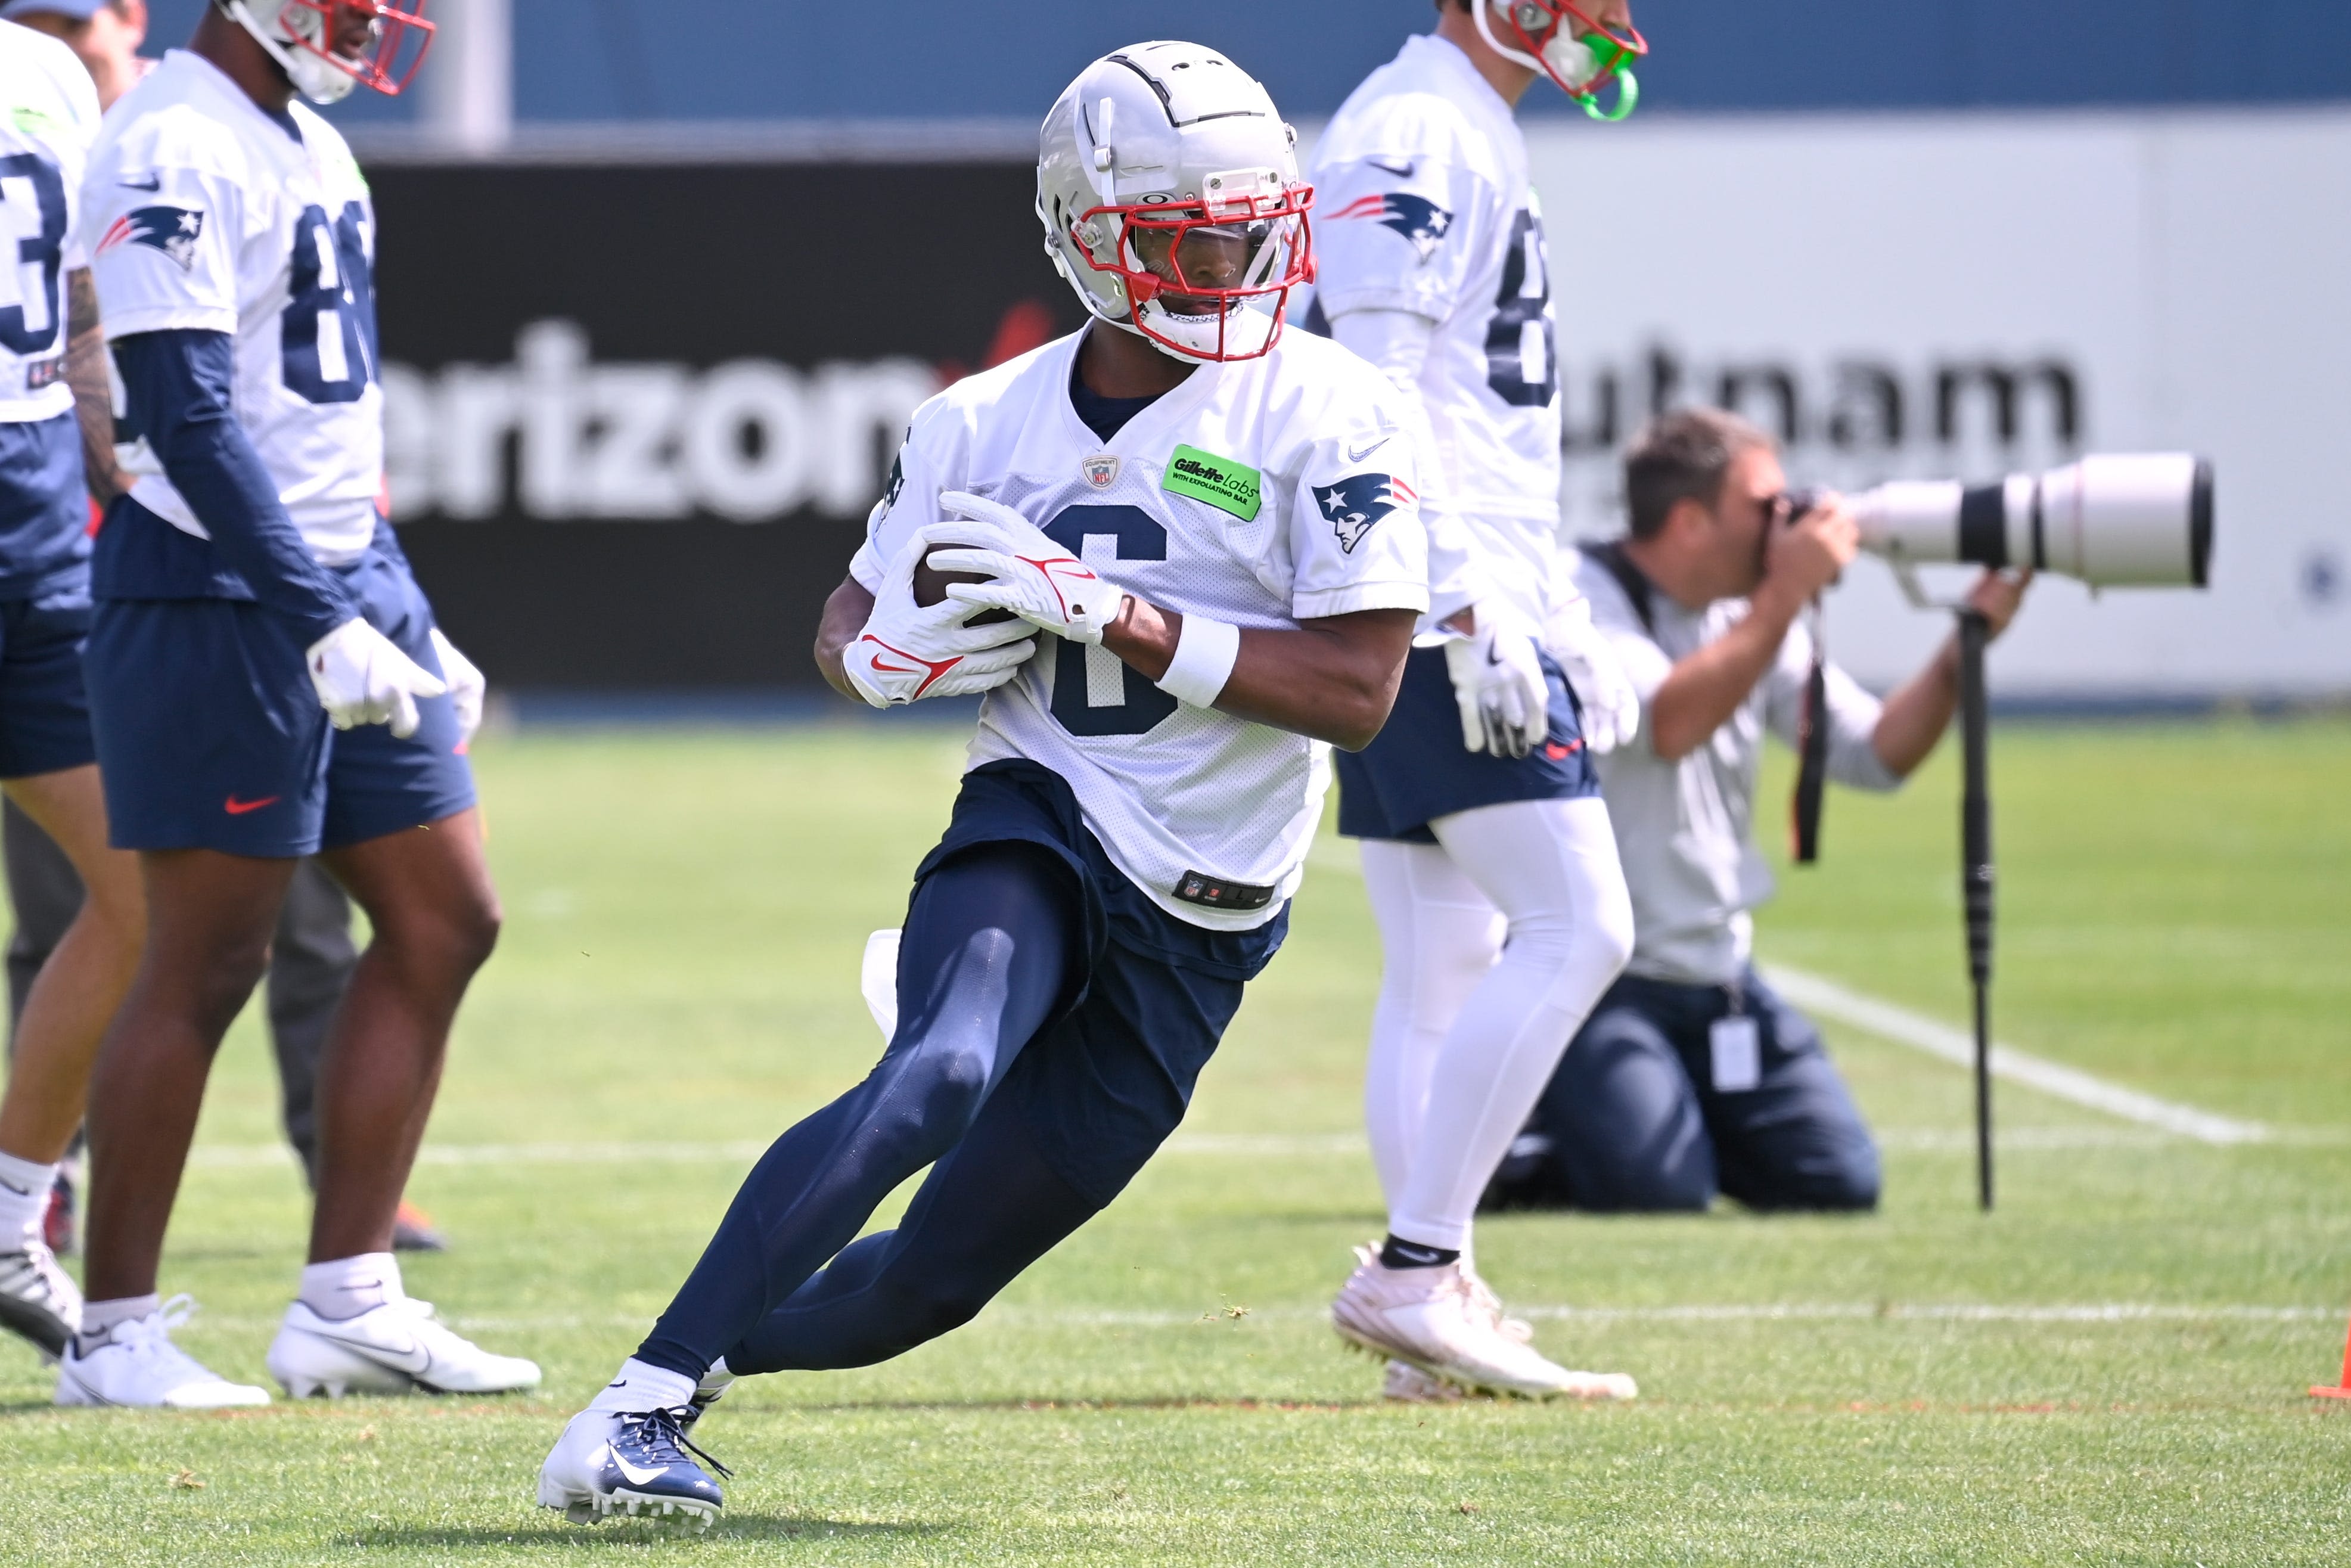 Here are 6 takeaways from the Patriots OTAs practice on Wednesday